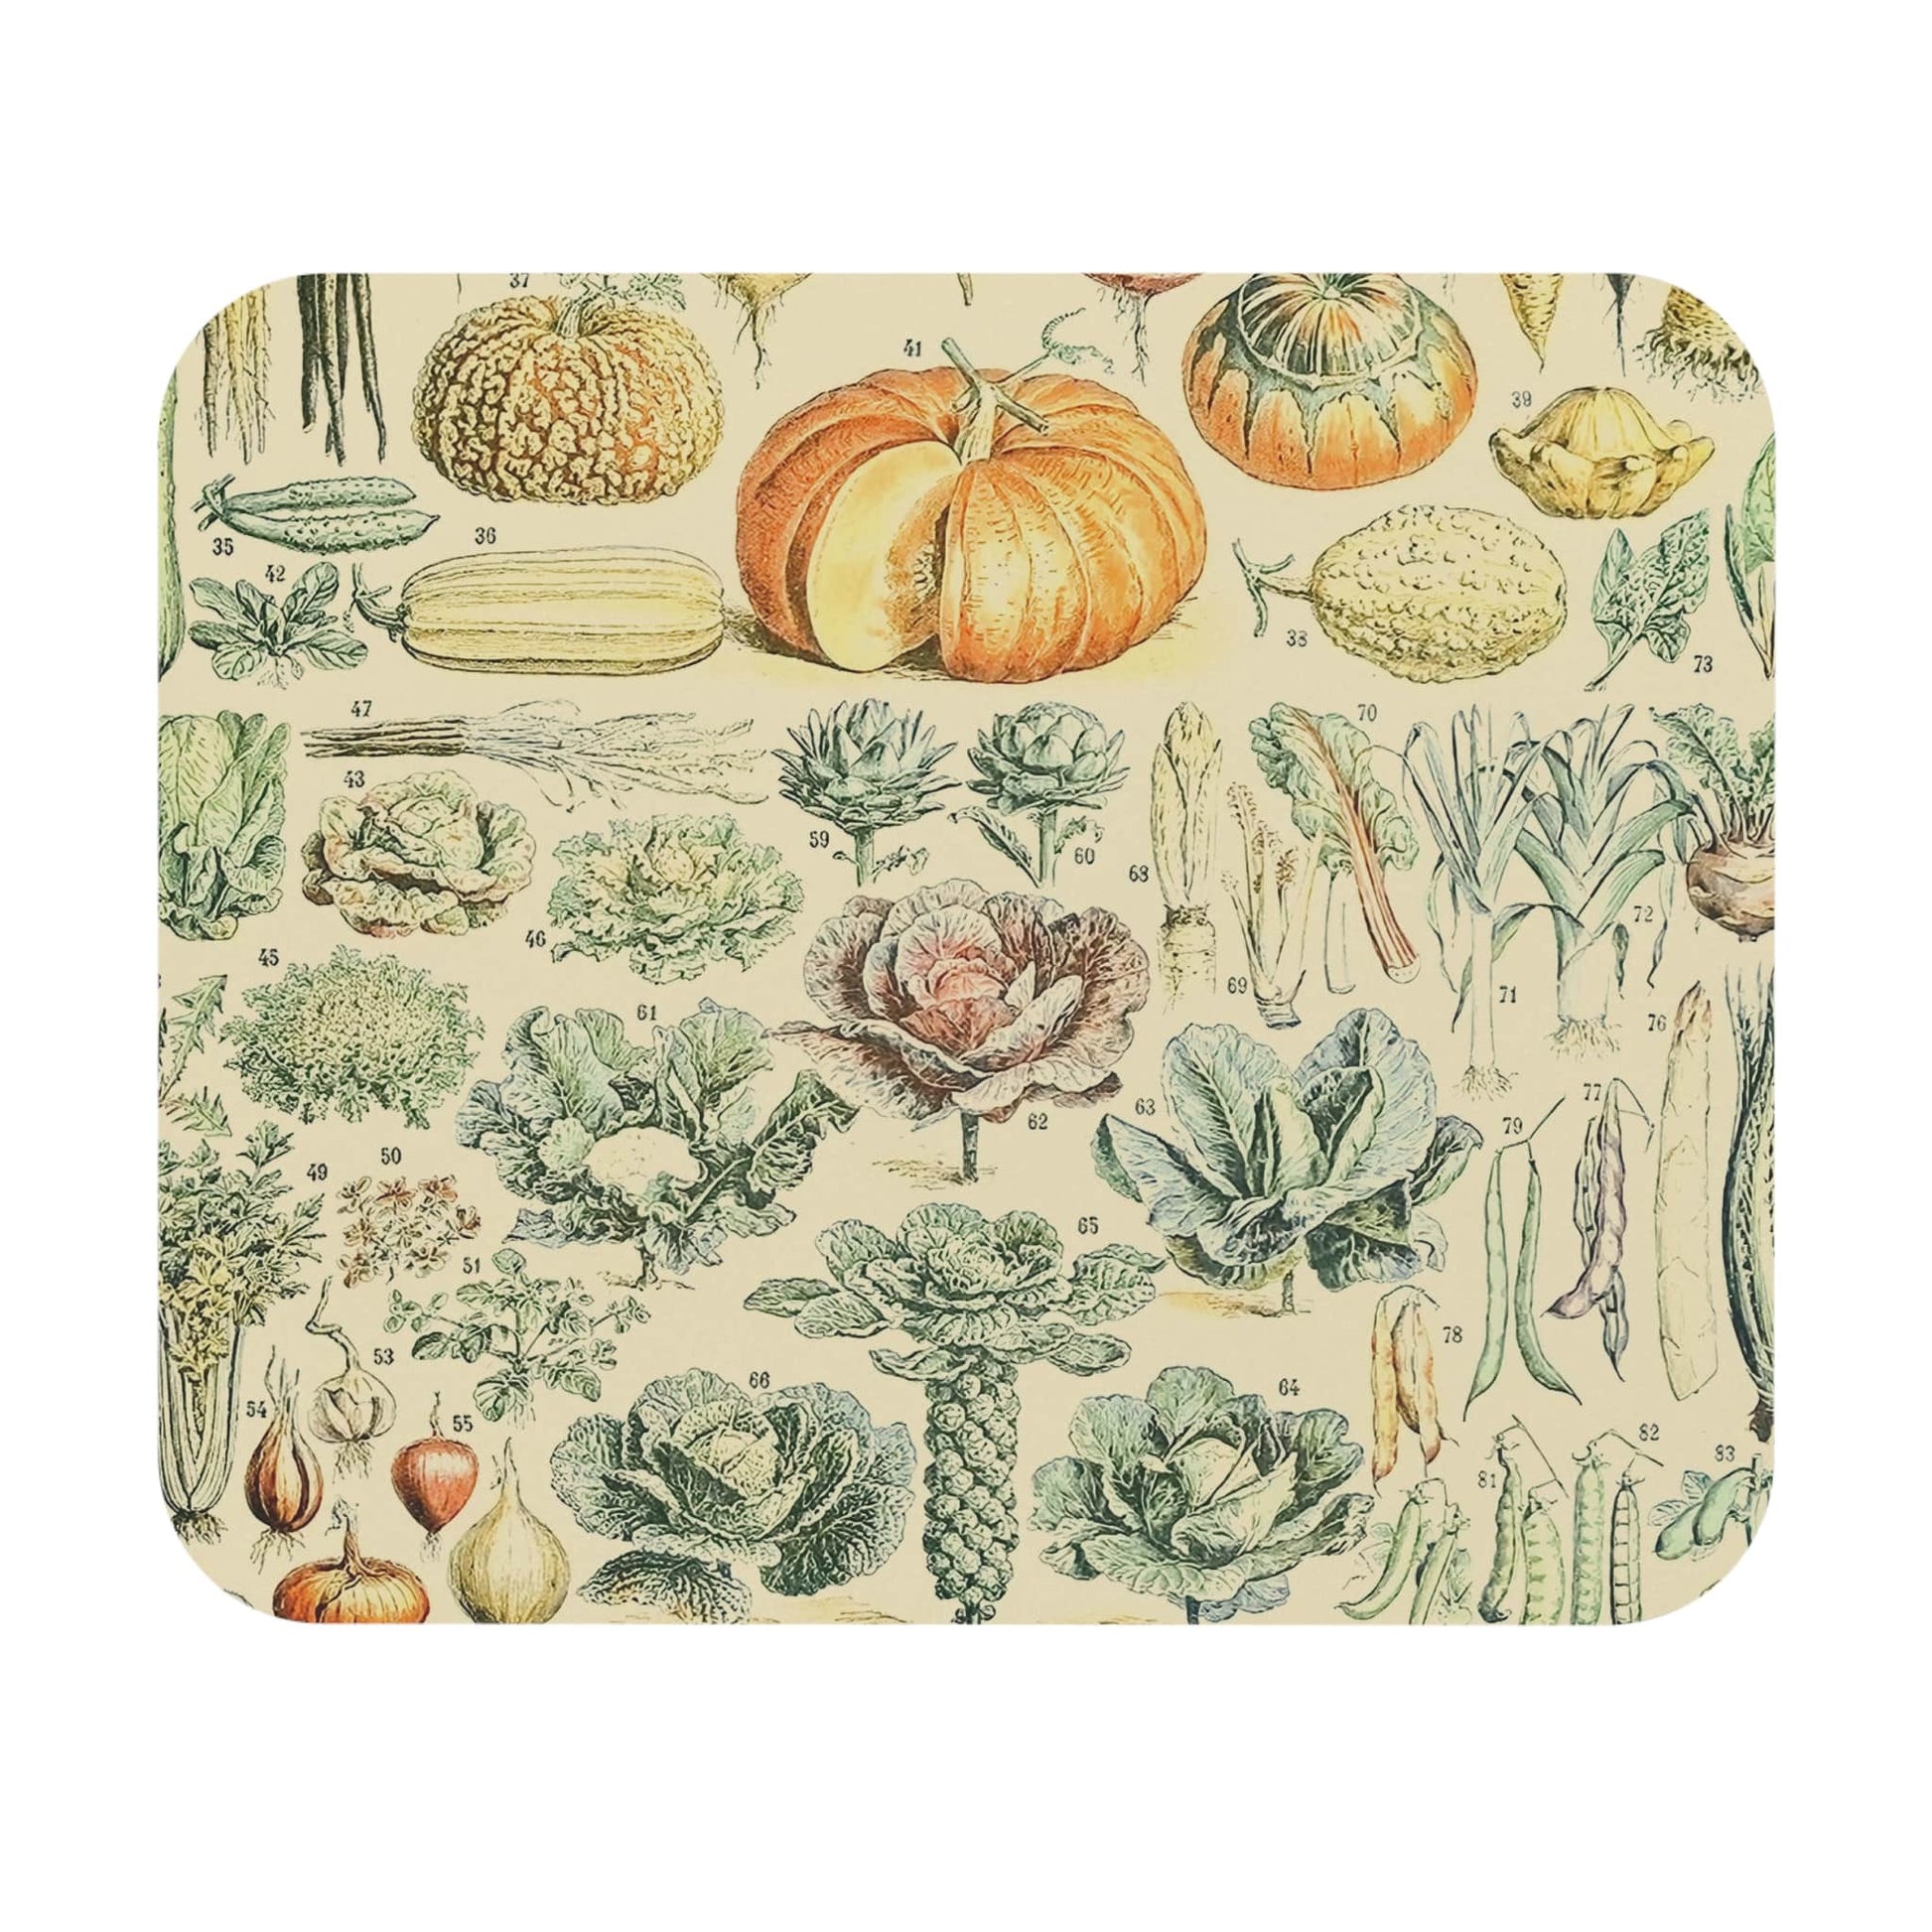 Vegetables Mouse Pad with a garden variety design, ideal for desk and office decor.